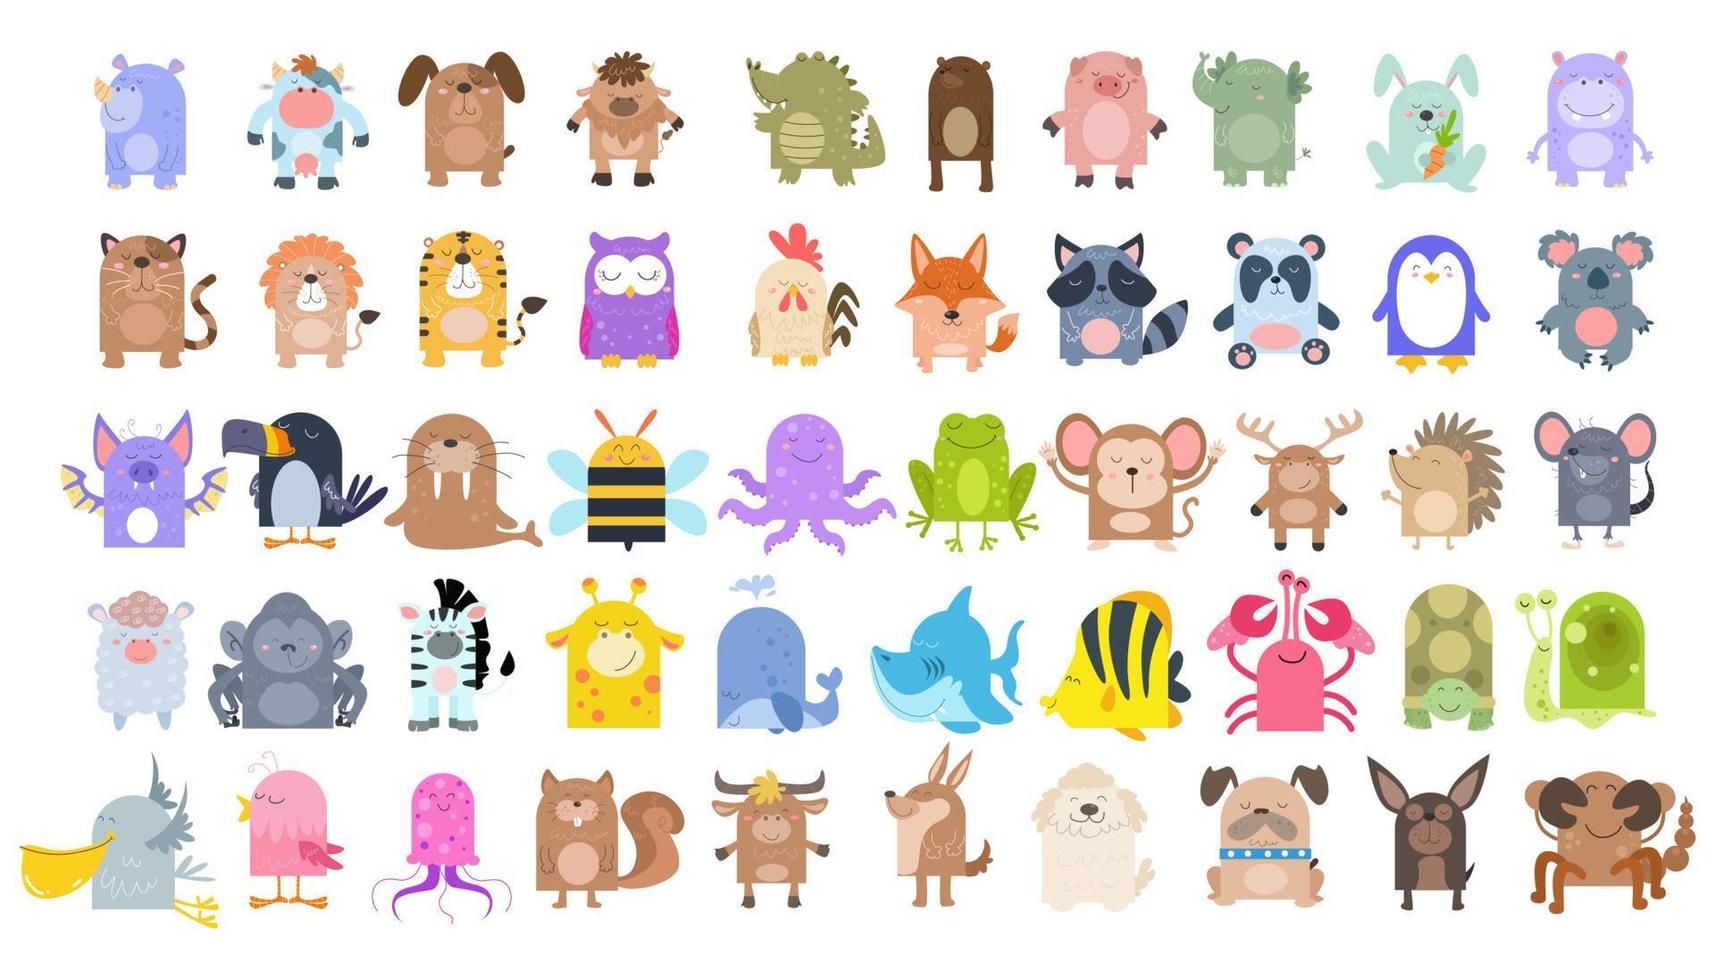 A collection of cute animal cartoons suitable for birthday cards or invitations vector